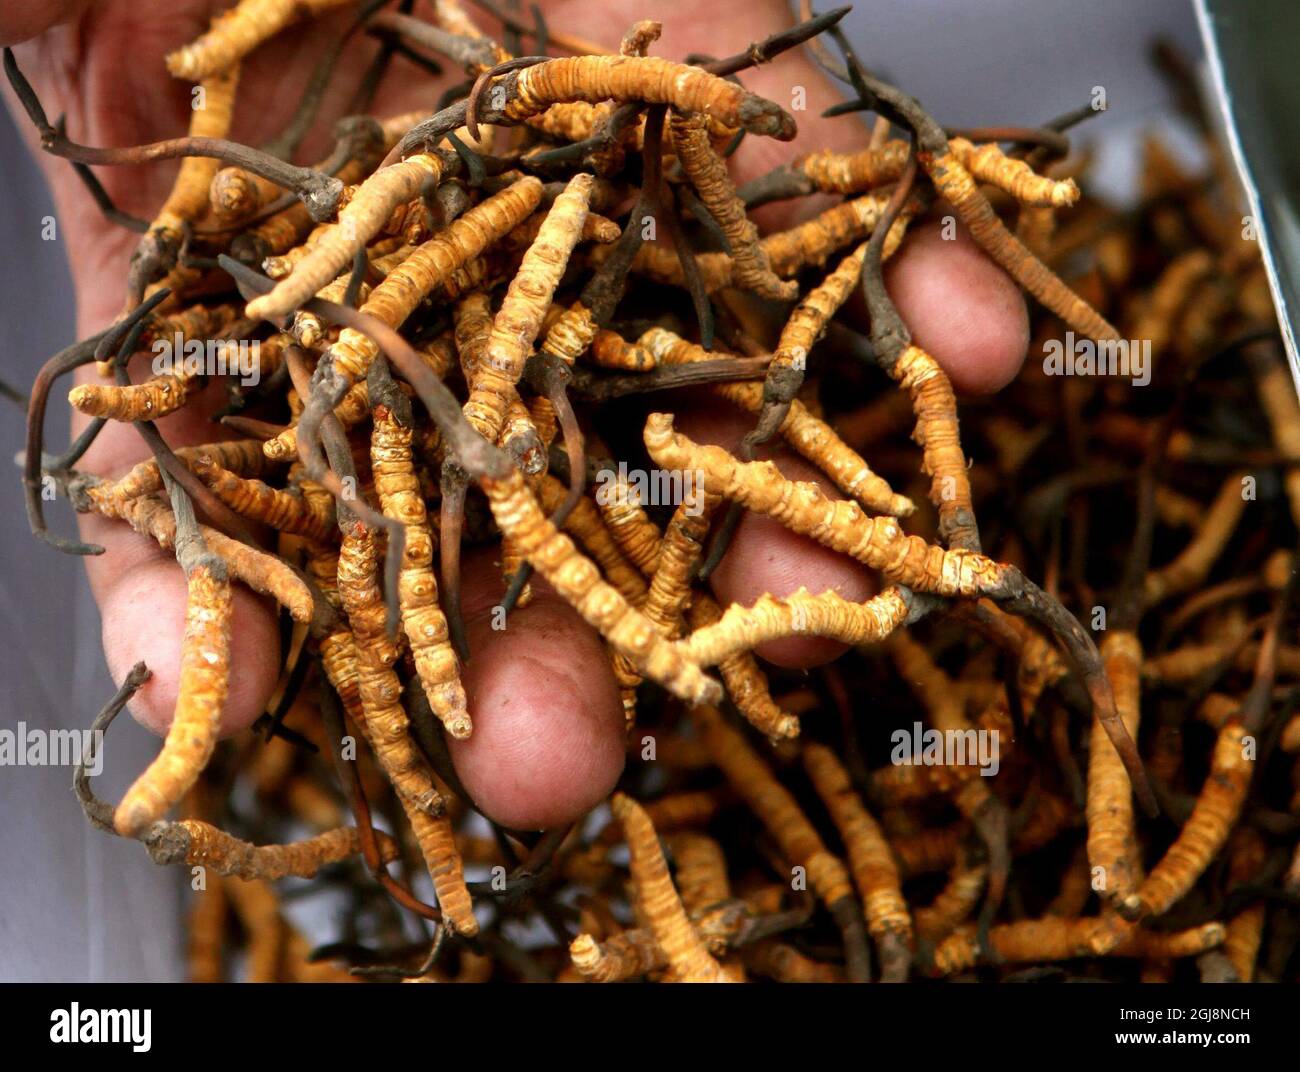 YUSHU 20130521 ''FILE'' - The coveted caterpillar fungus has become many Tibetan herders and farmers main source of income. Foto Torbjorn Petersson / SCANPIX / Kod 4278 Stock Photo